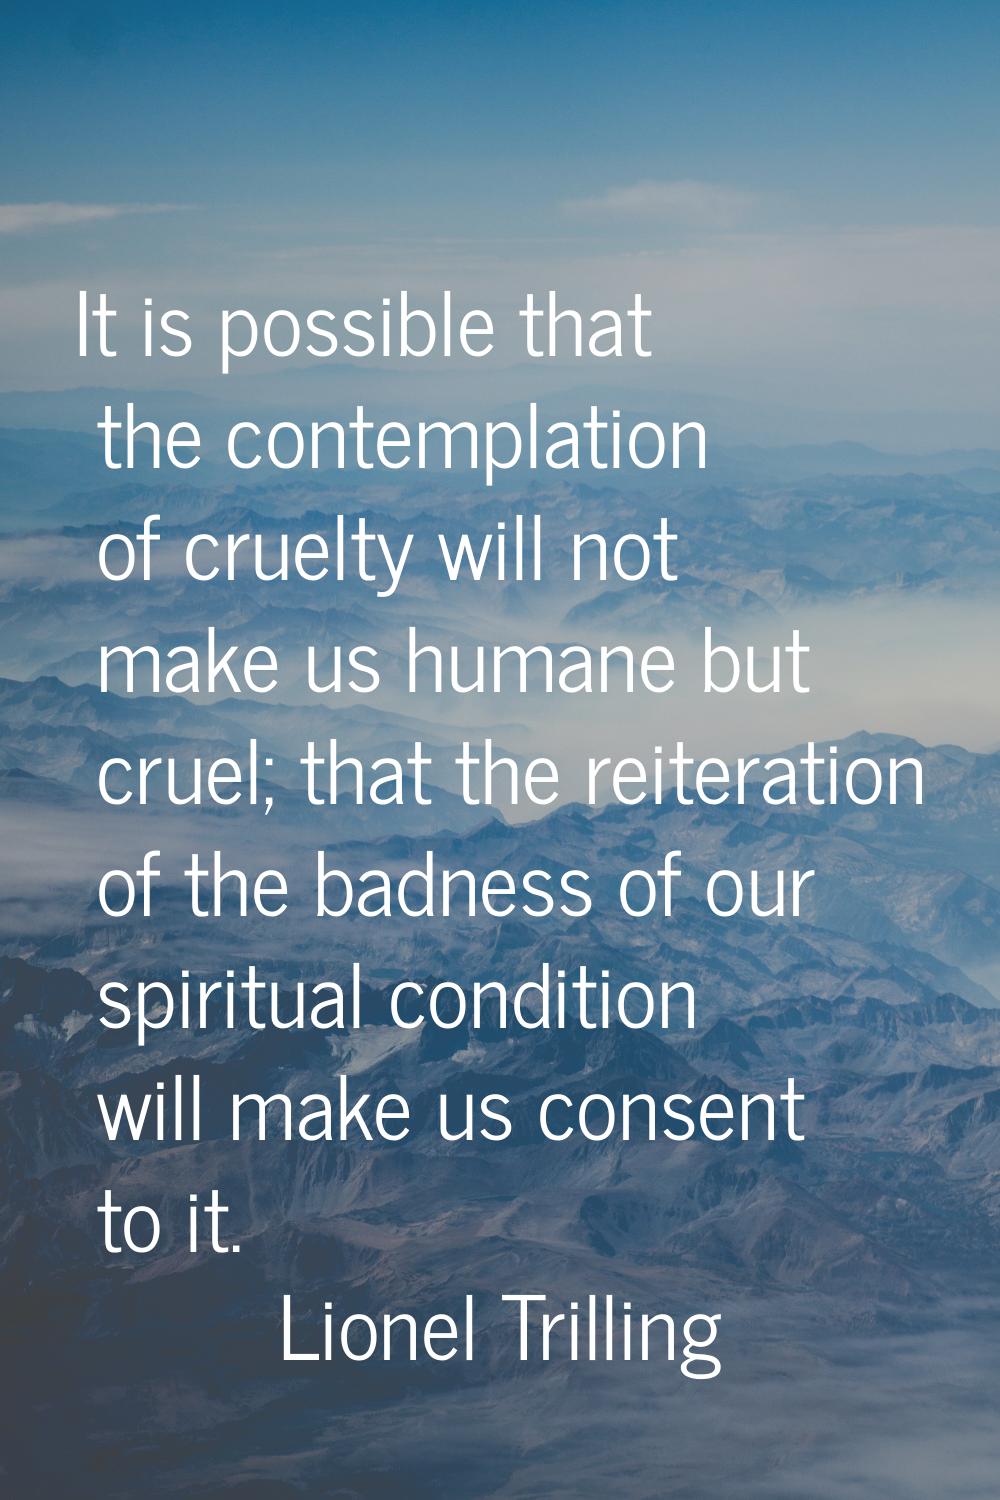 It is possible that the contemplation of cruelty will not make us humane but cruel; that the reiter